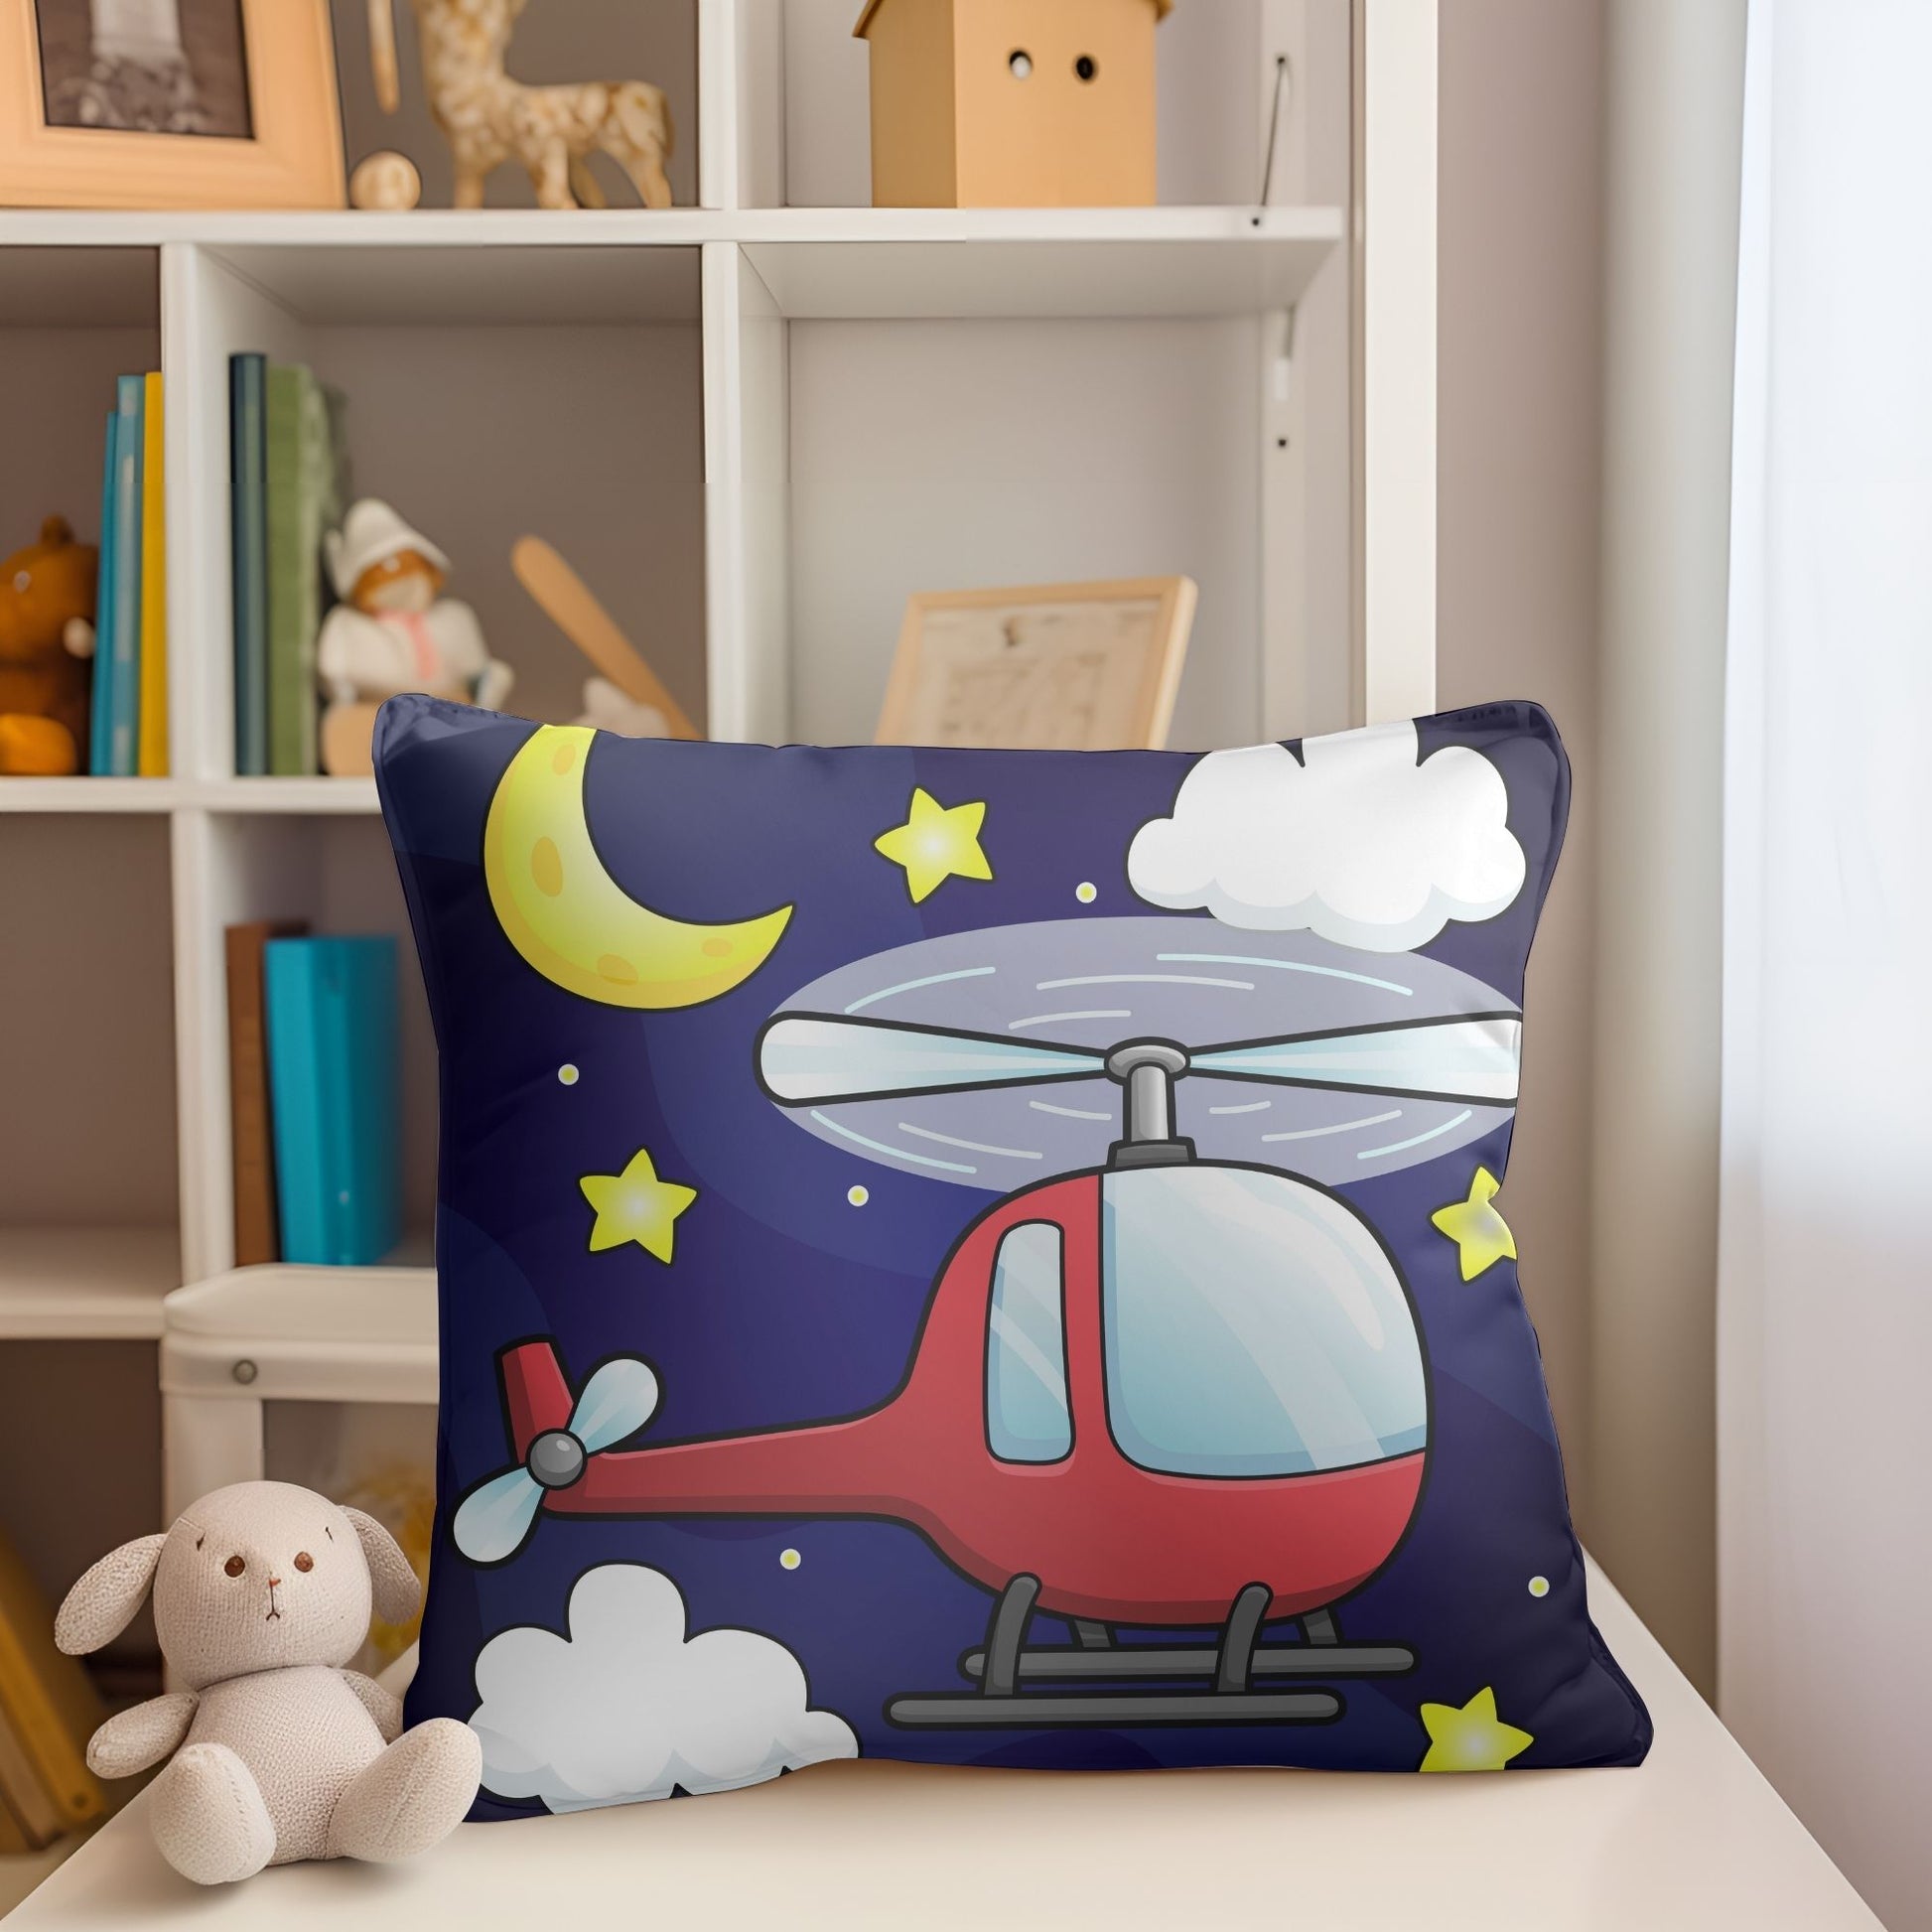 Vibrant red helicopter kids room pillow for aviation-themed decor.